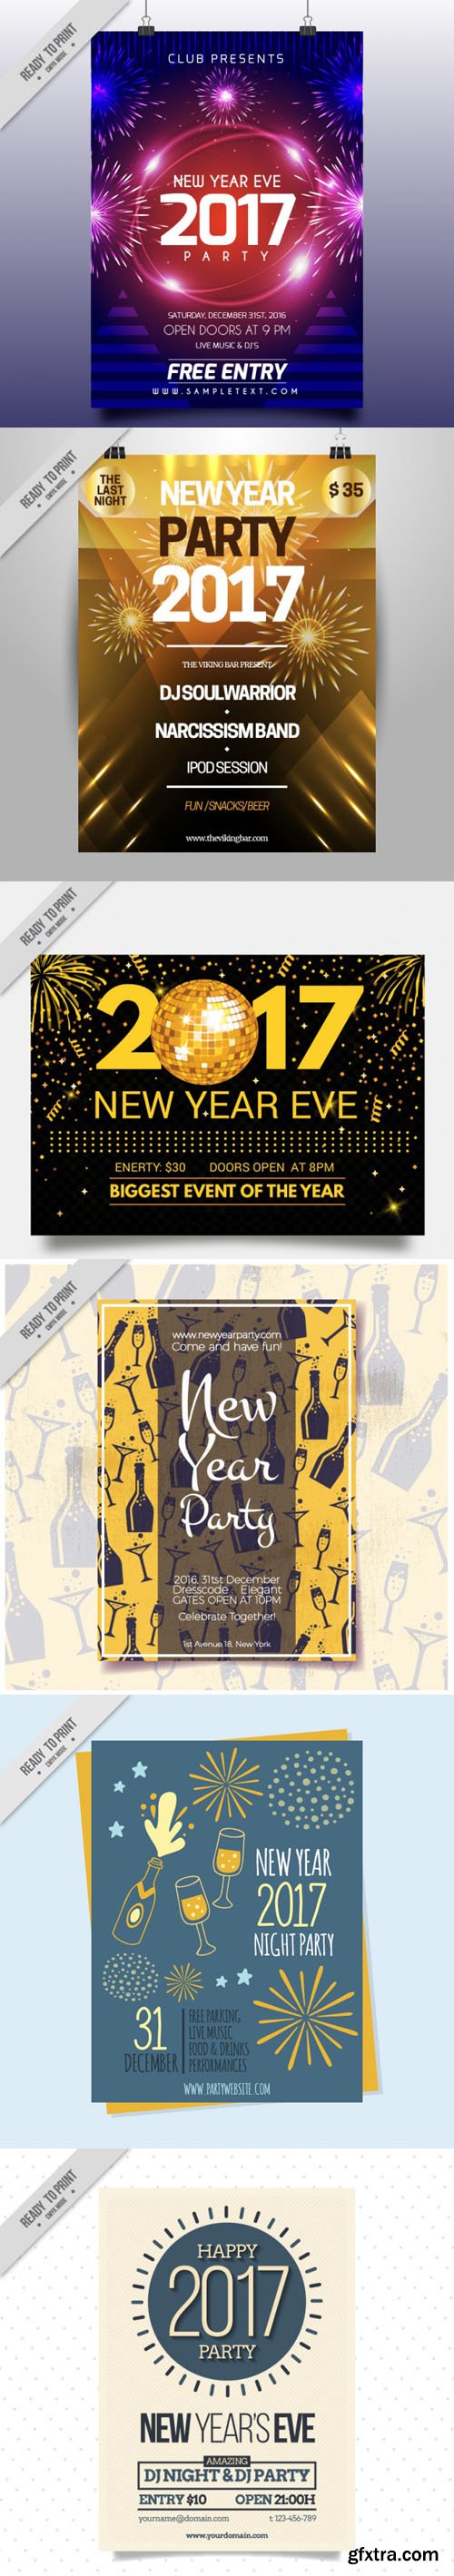 New Year Party Flyers Invitation in Vector [AI/EPS]